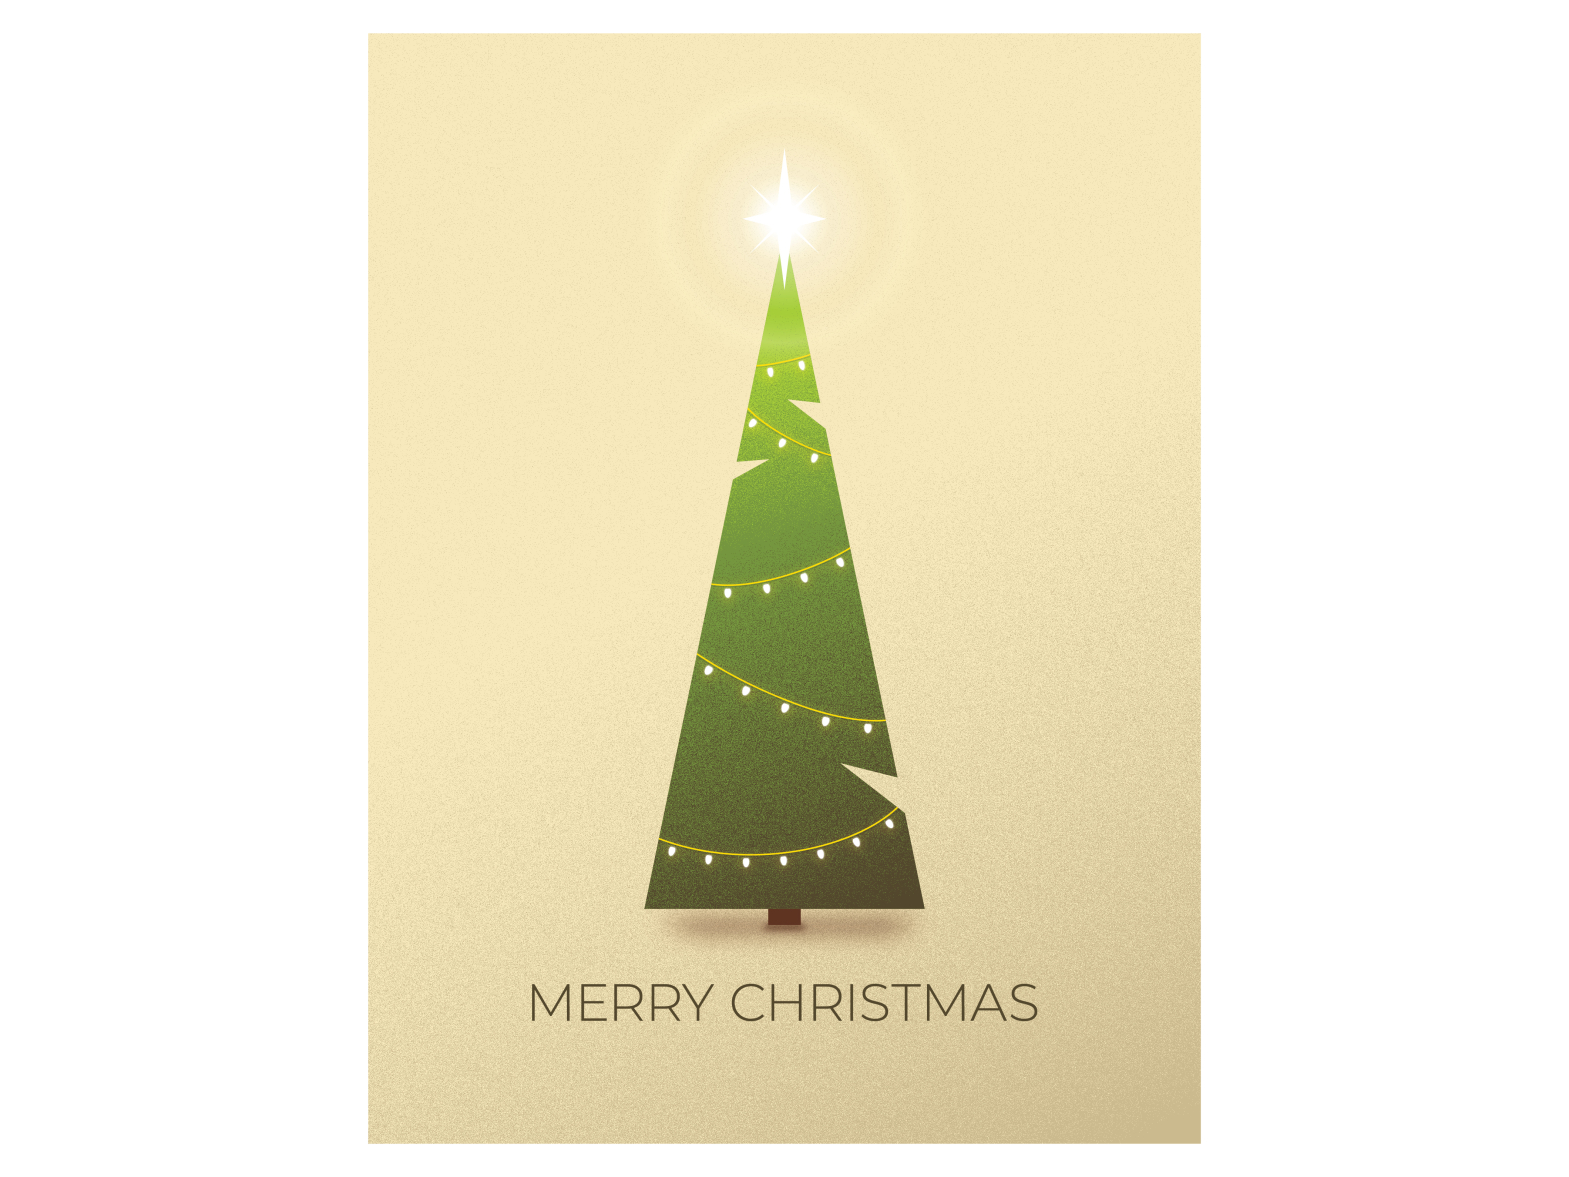 Merry Christmas by Aaron Miller on Dribbble